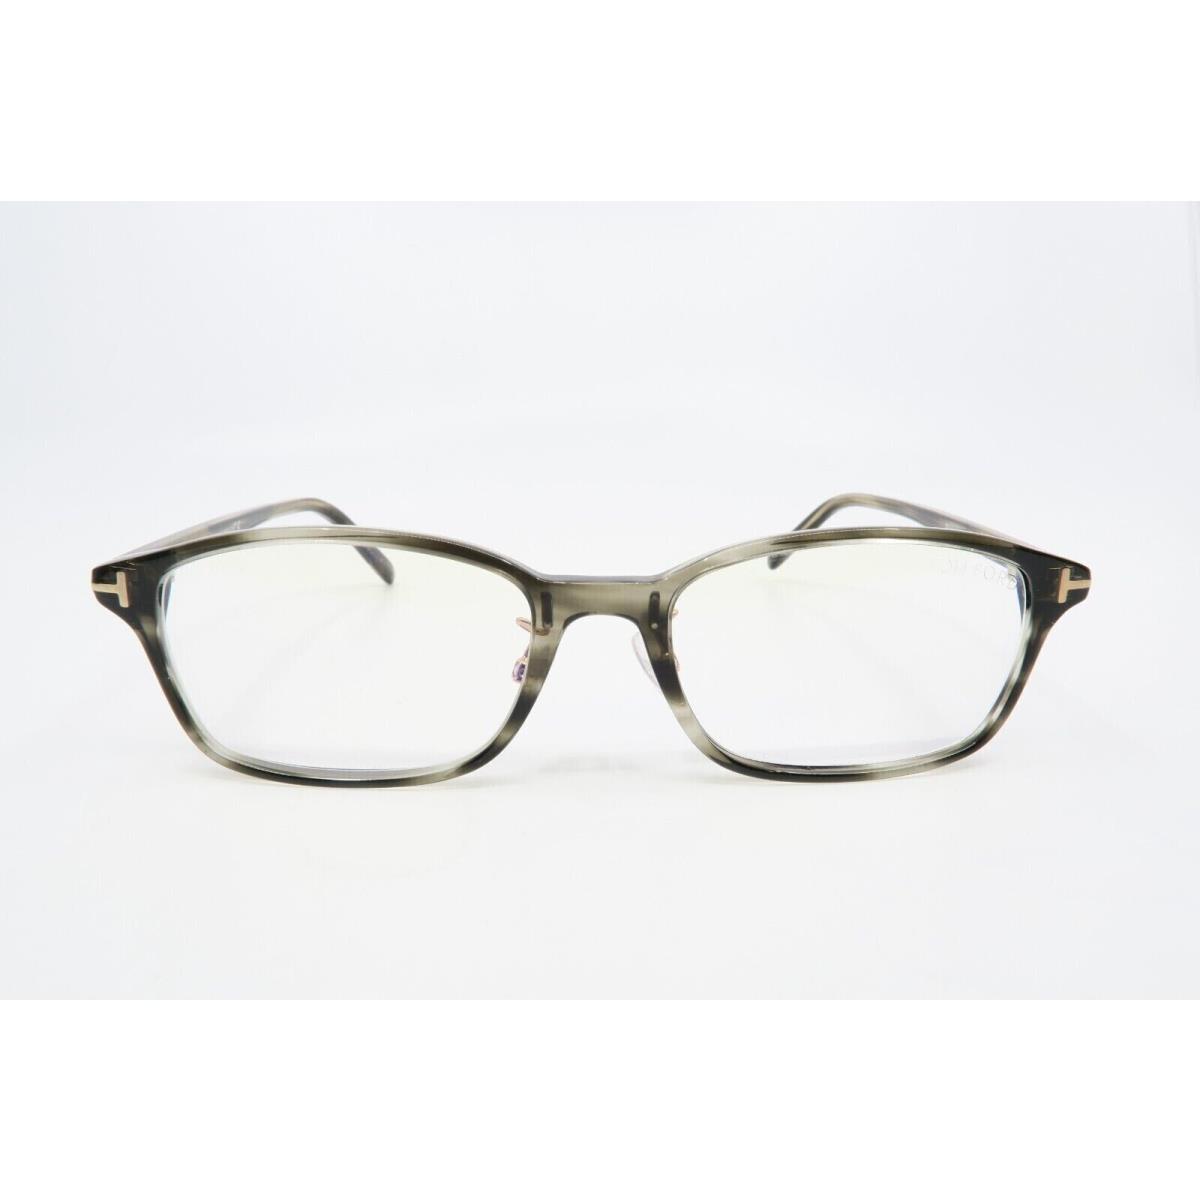 Tom Ford Eyeglasses Tom Ford TF 5647-D-B c.005 in Gray Stripes w/ Nose Pads 53mm